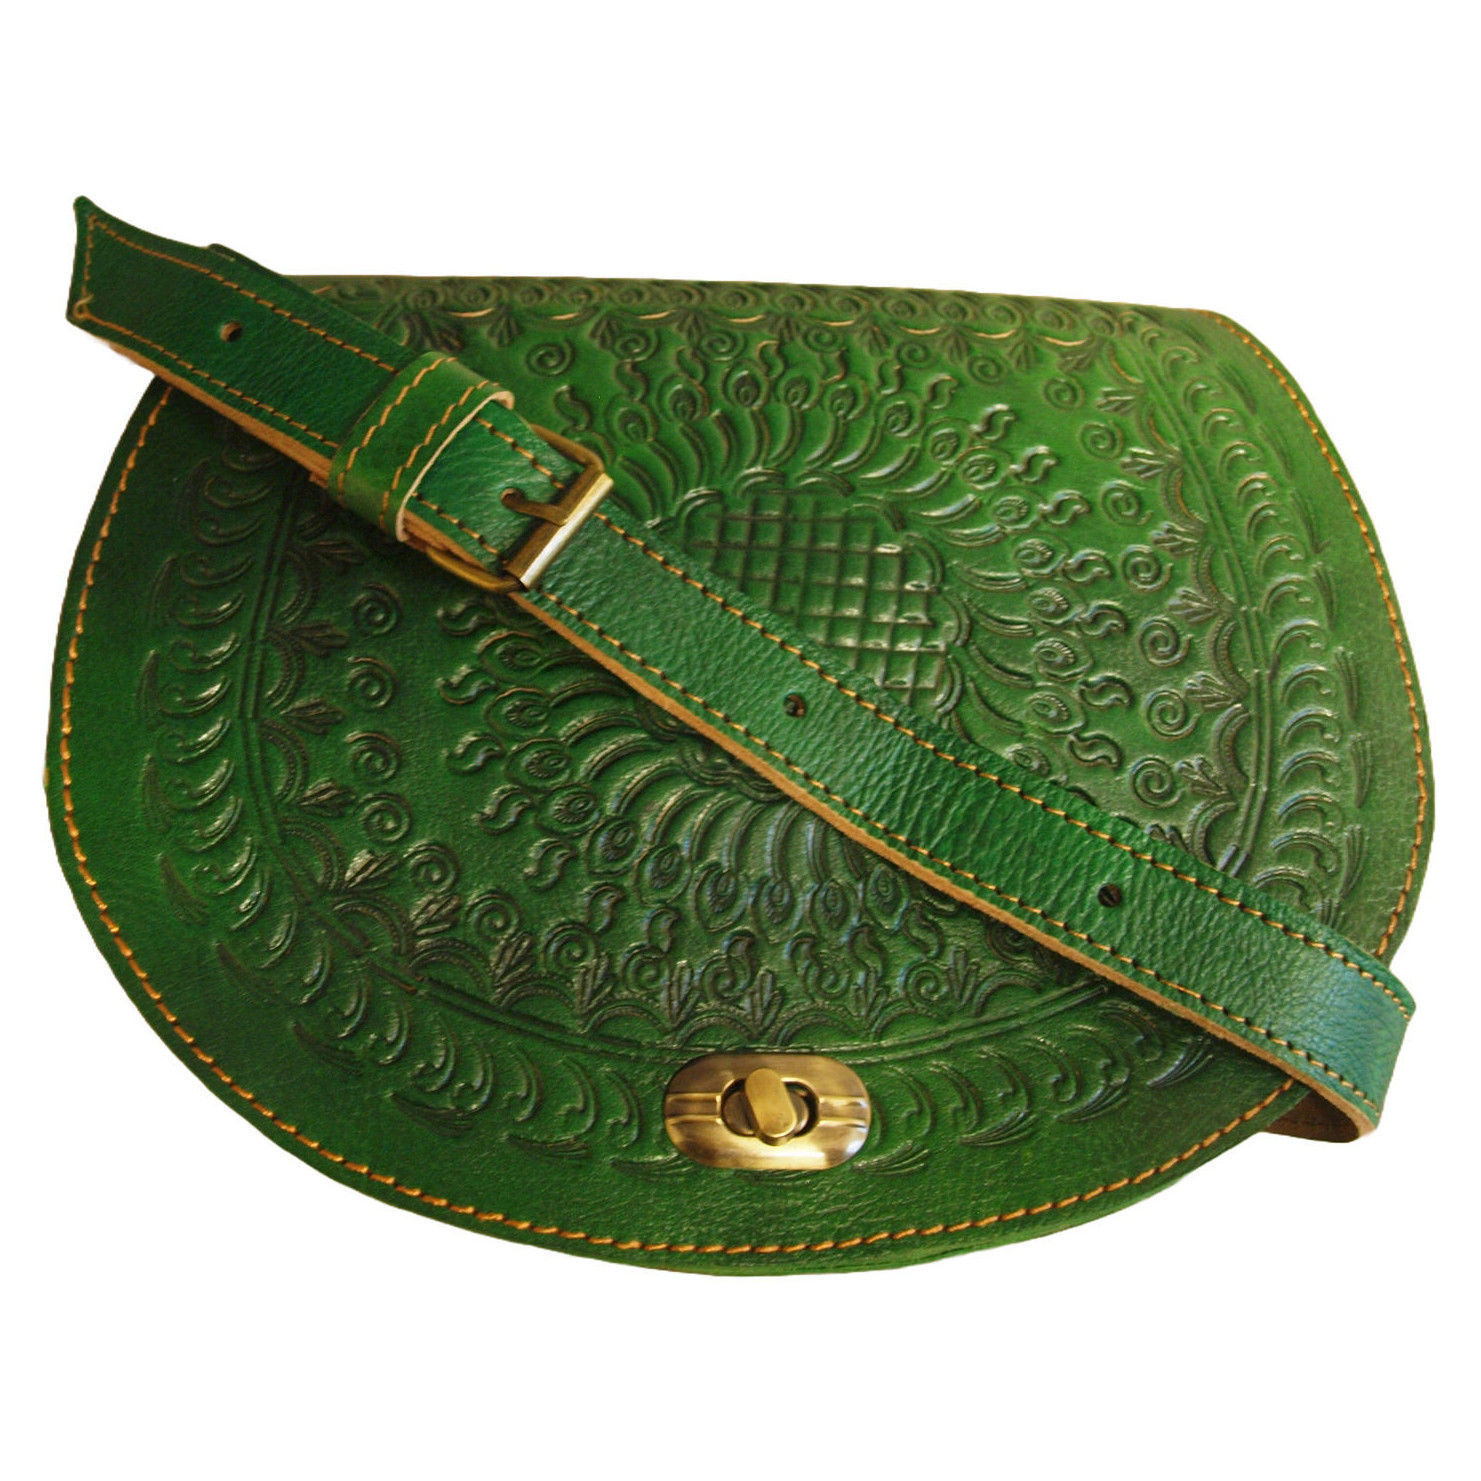 The Temara Embossed Saddle Bag in Green on White Background